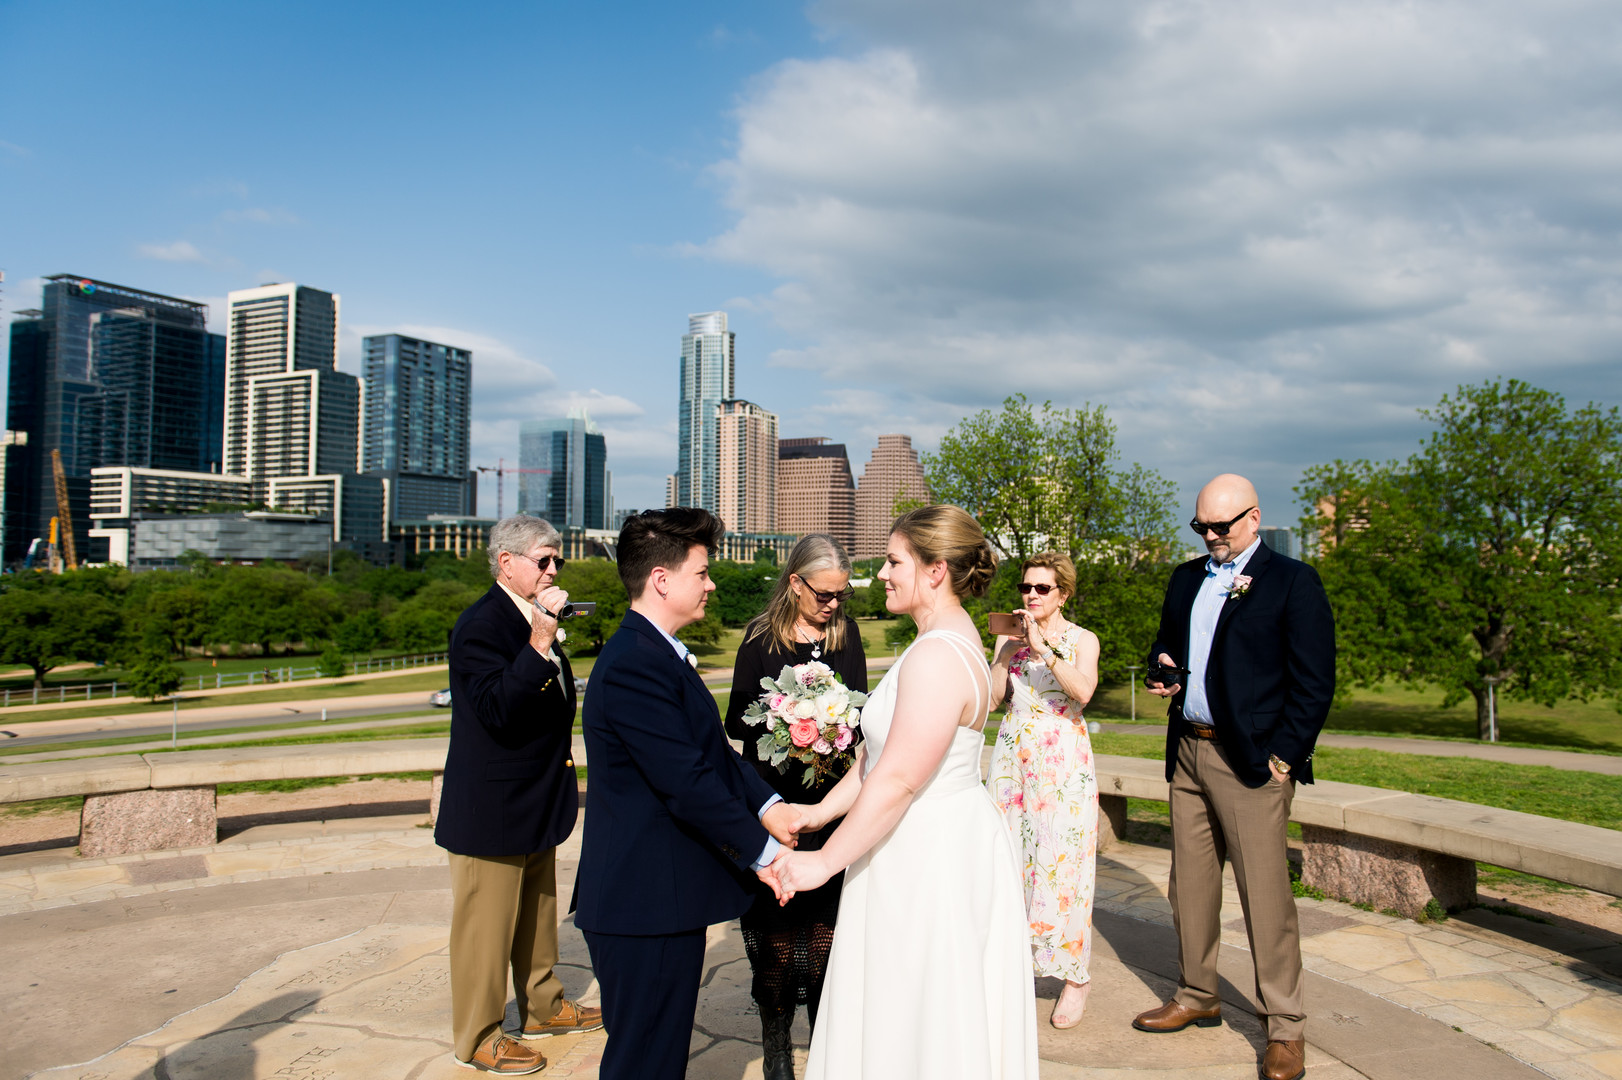 Intimate spring wedding at Butler Park in Austin, Texas LGBTQ+ weddings lesbian wedding two brides white dress navy blue suit vows